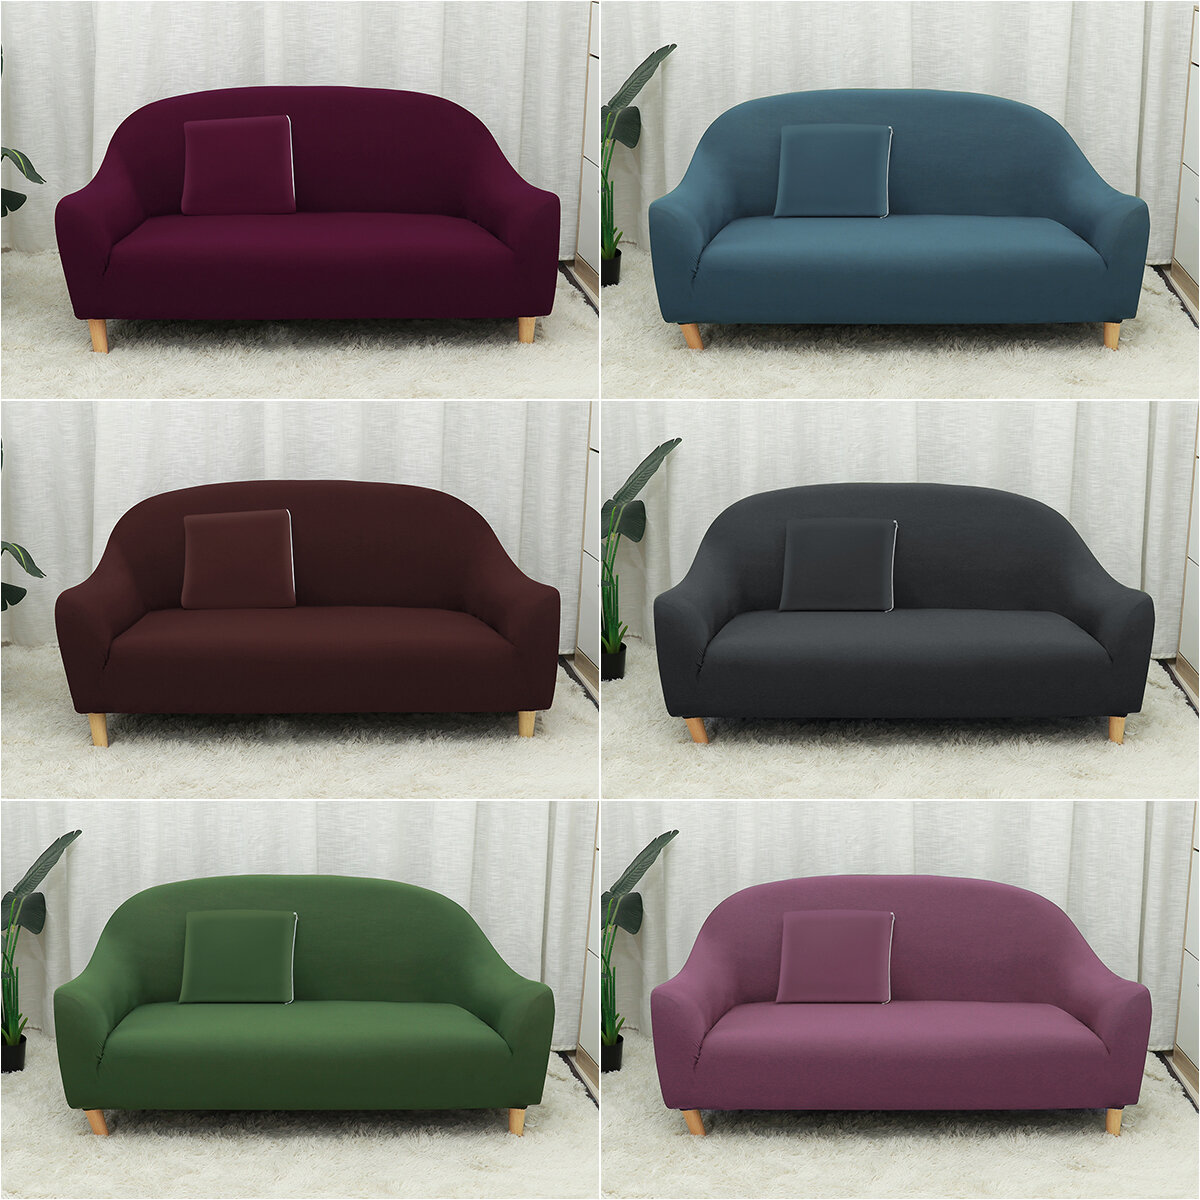 Large Sofa Cover Elastic Polyester Three-Seat Machine-Washable Sofa Cover For Home Office Decoration